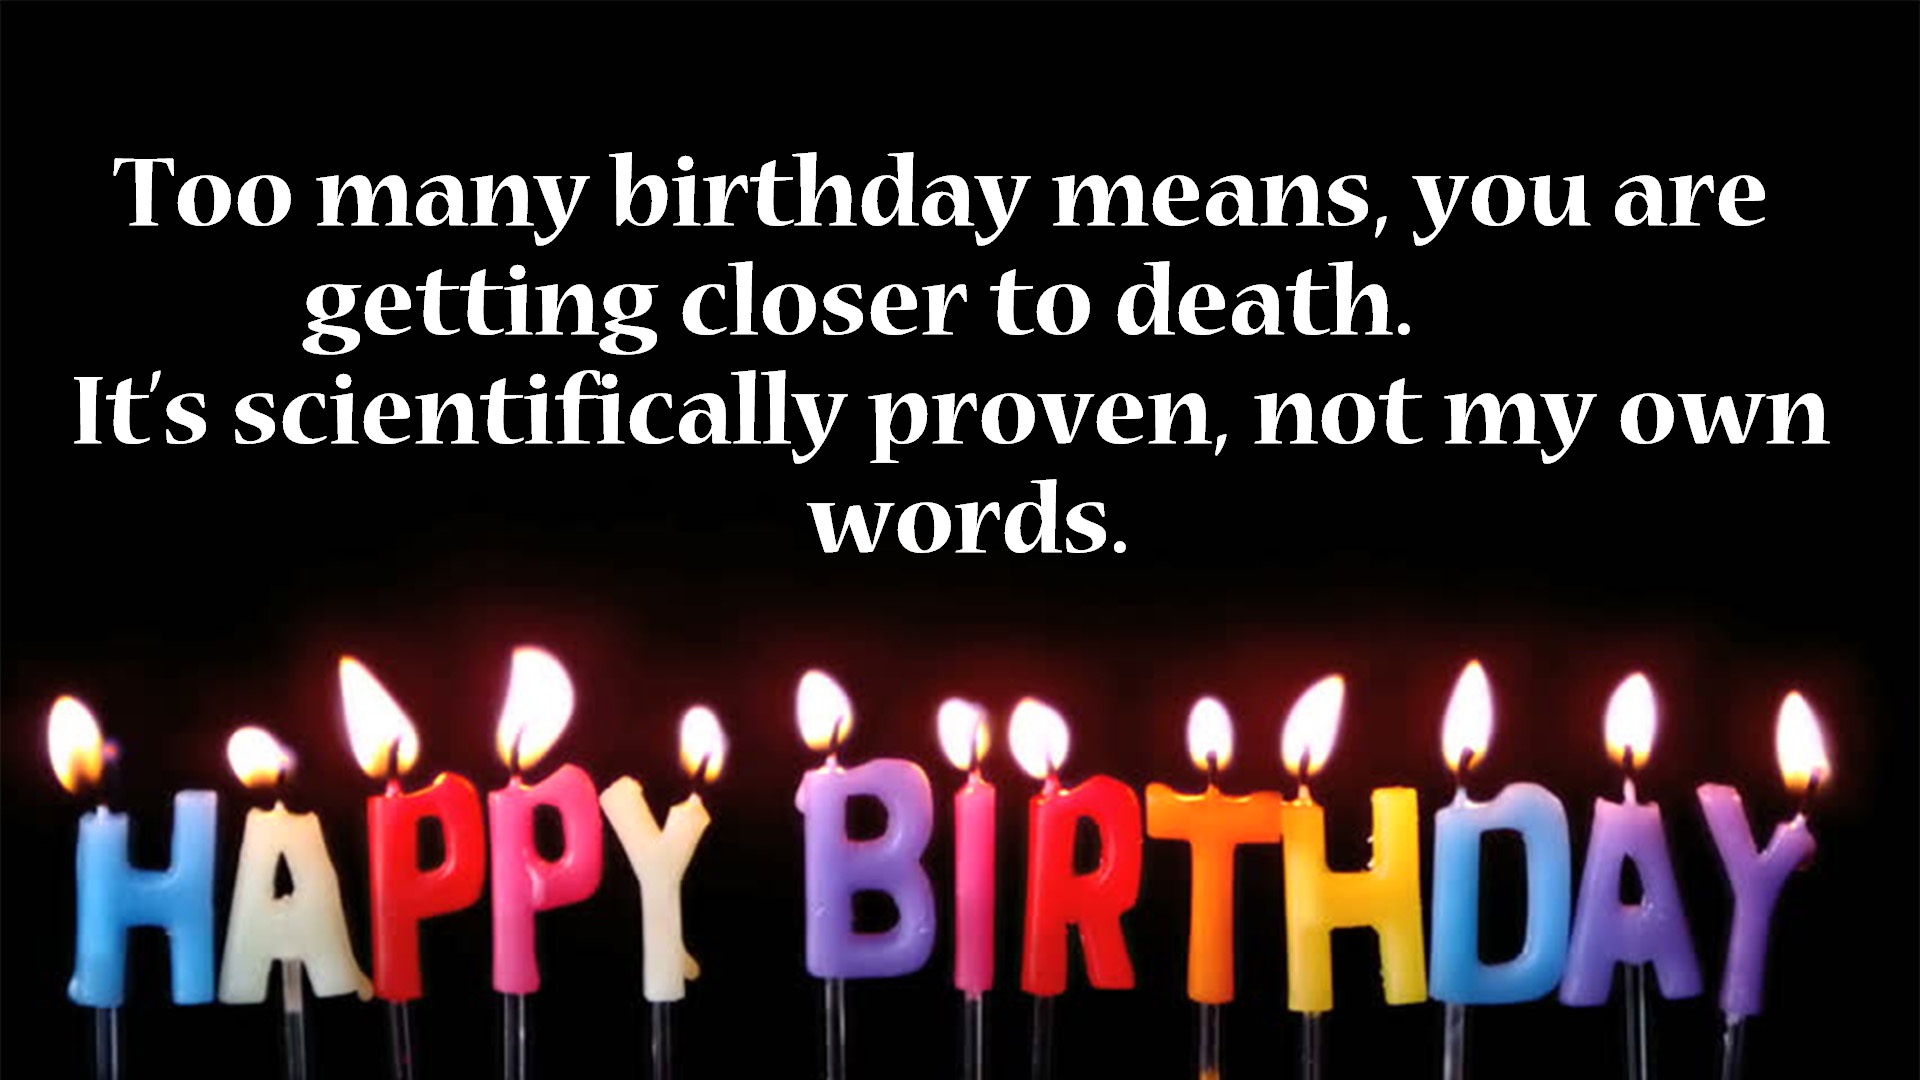 Funny Birthday Quotes & Wishes Images | Funny Happy Birthday Wishes